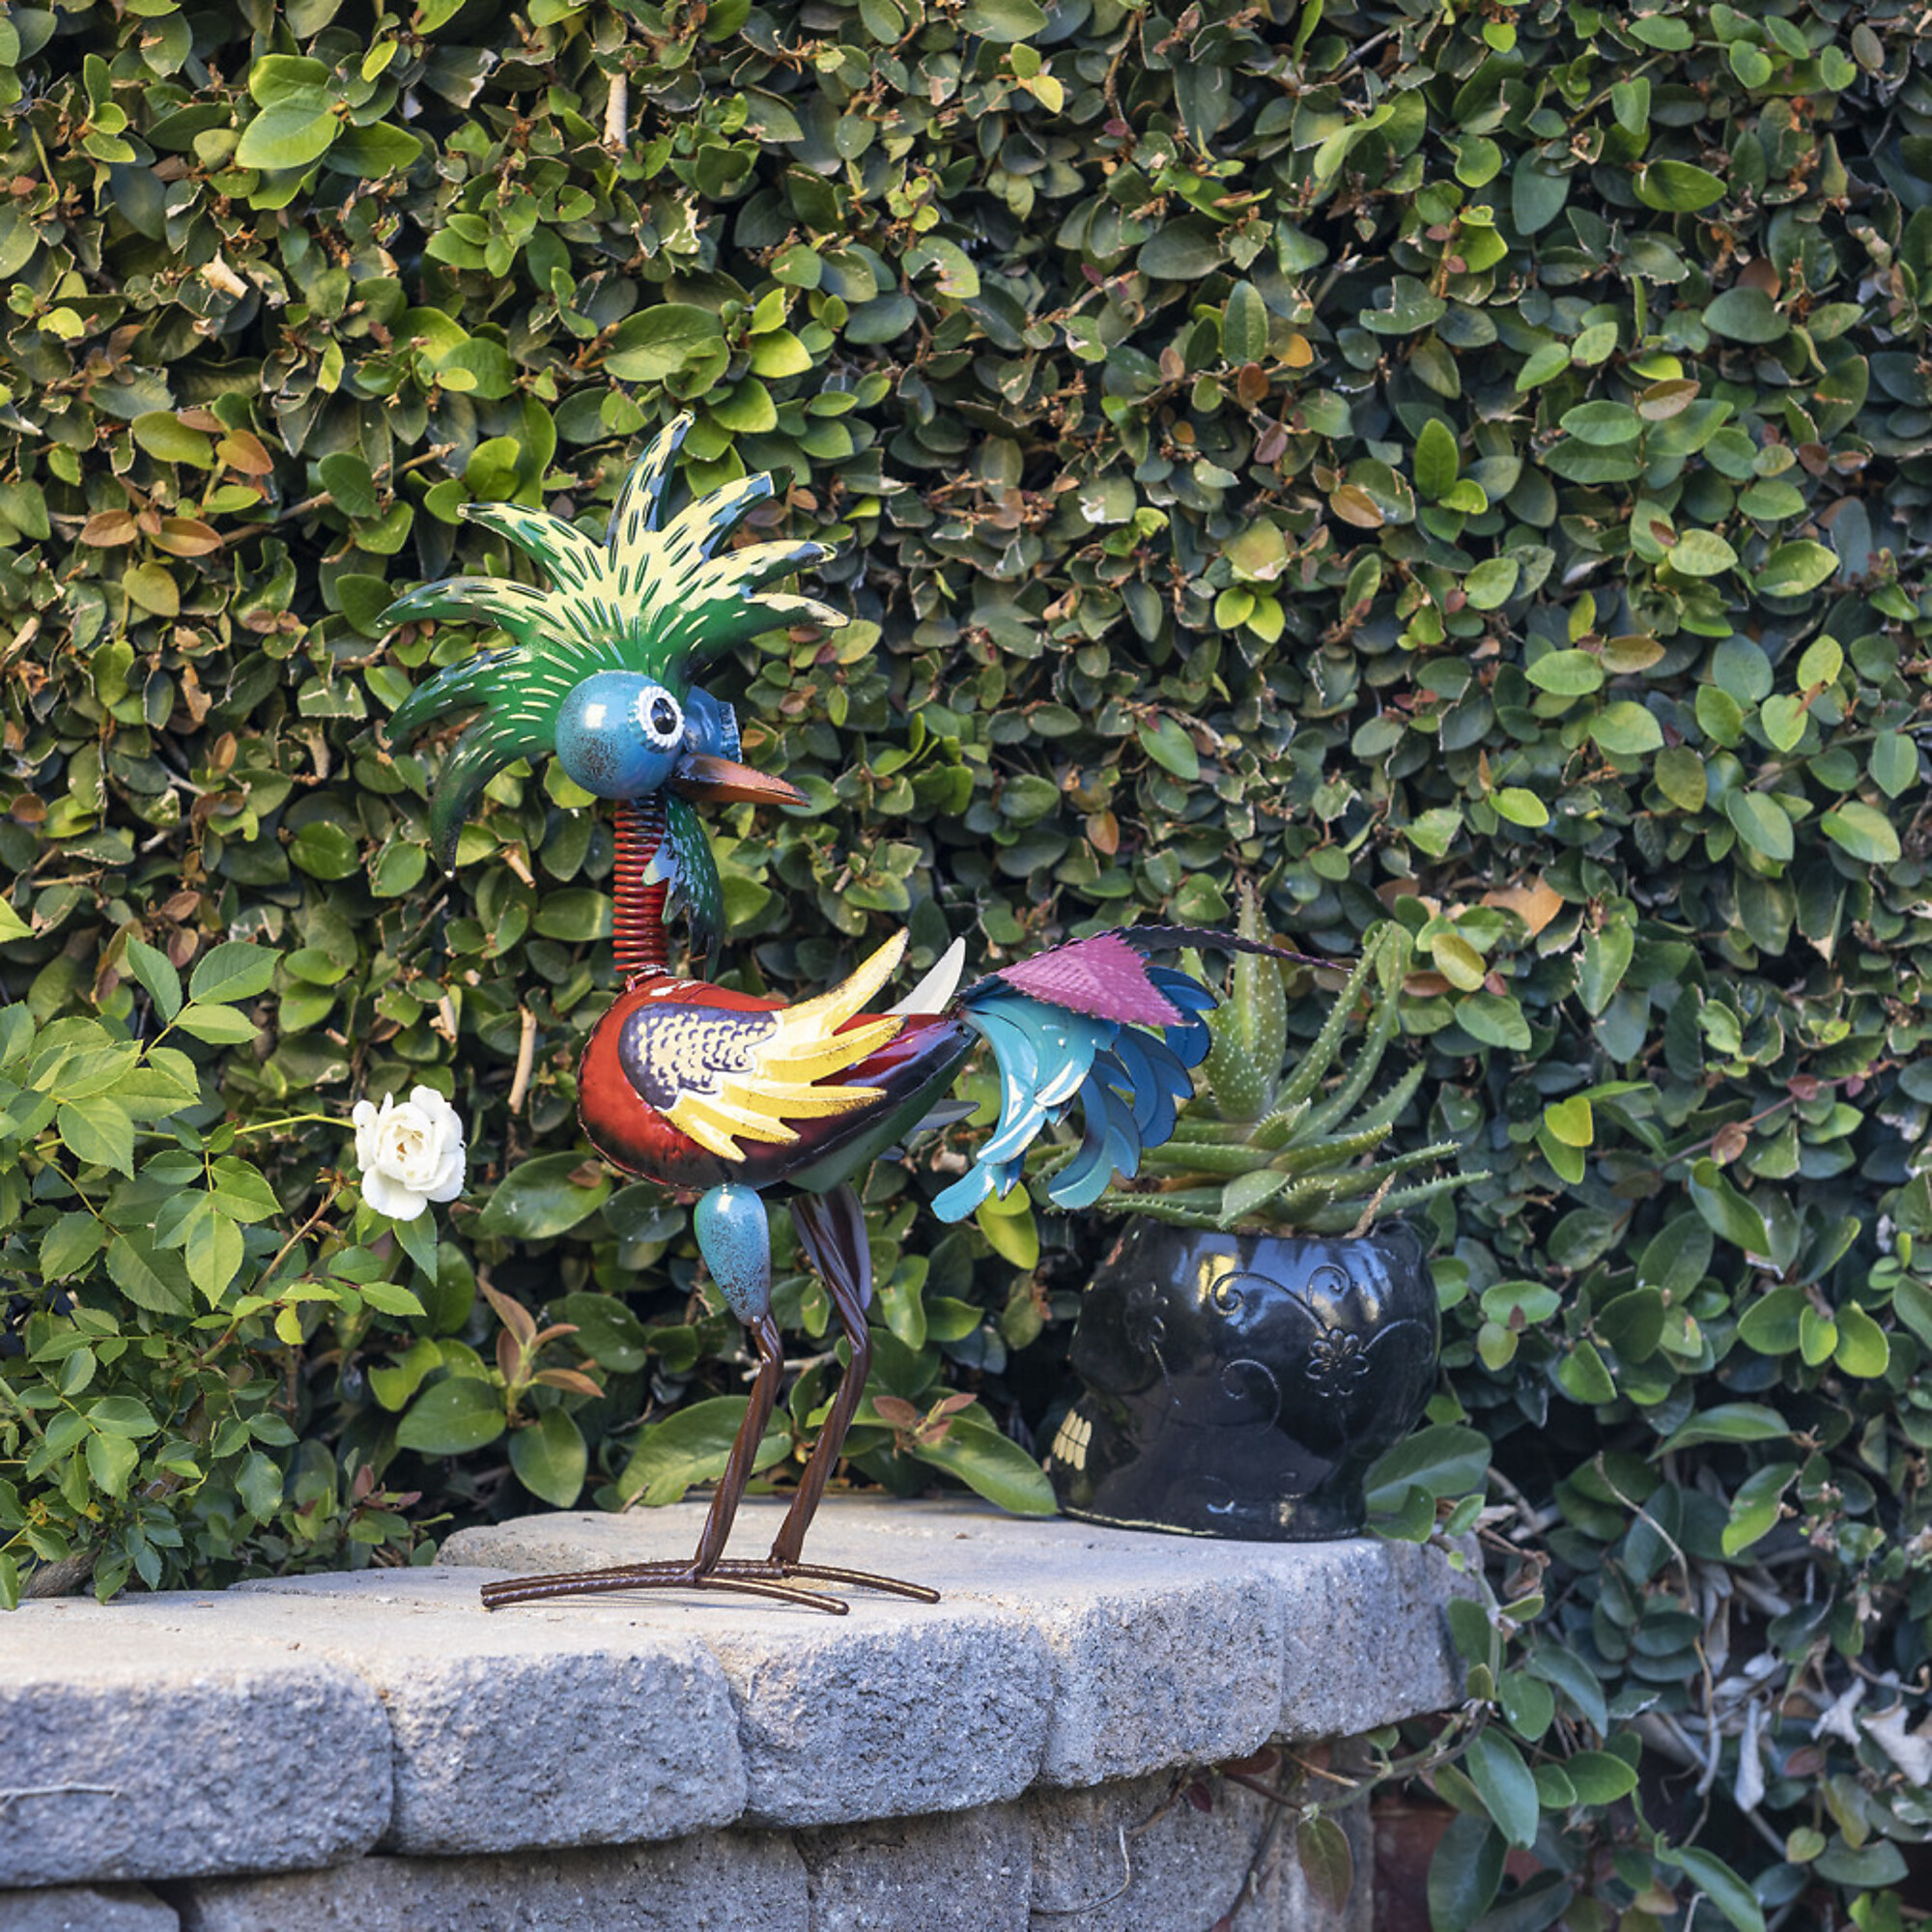 Alpine Corporation, Metal Wacky Tropical Rooster Decor with Blue Tail, Model MZP390